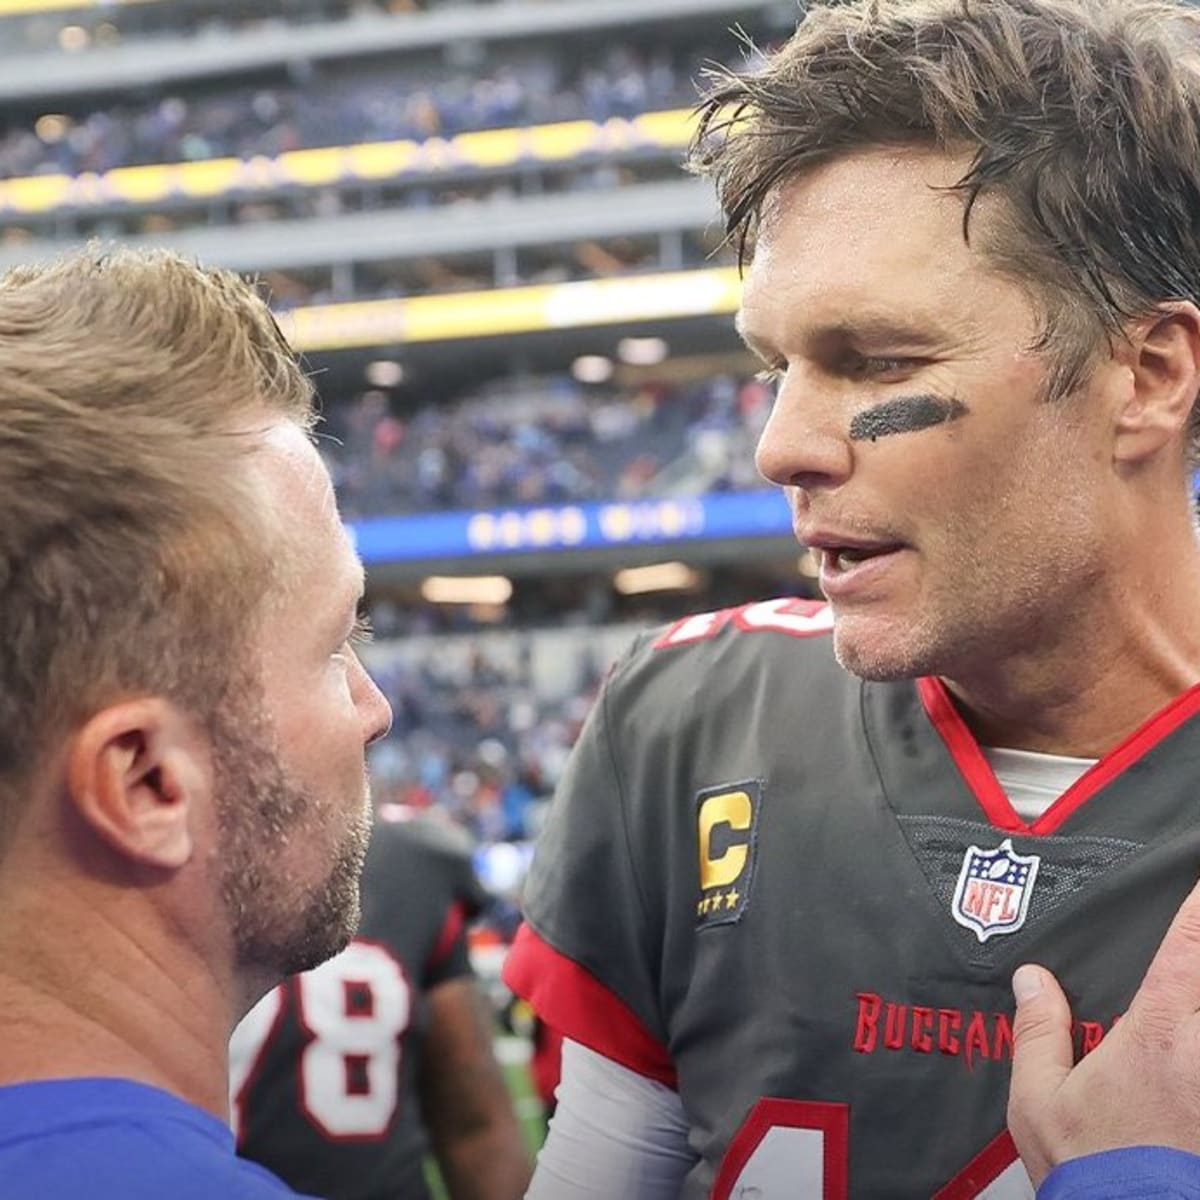 Brady, Rodgers epically trash-talking Mahomes, Allen ahead of charity golf  match